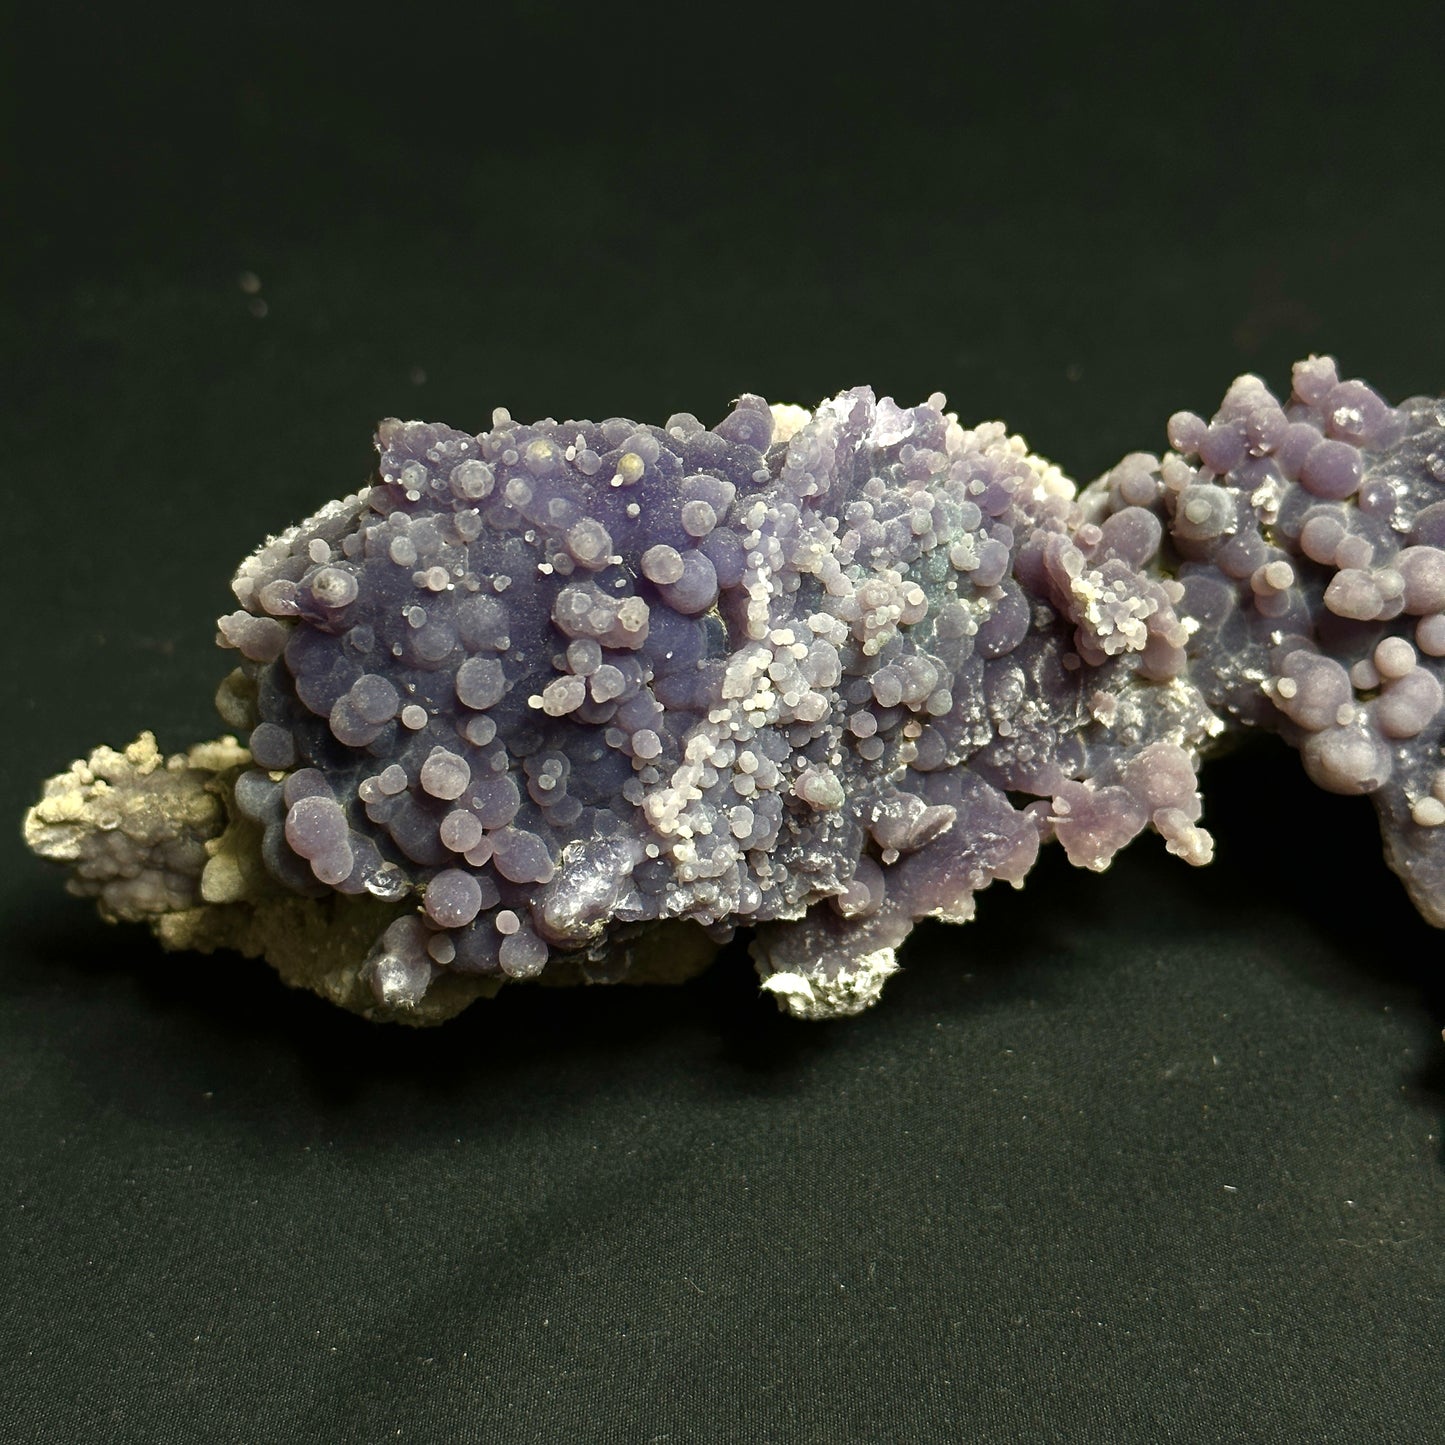 Unique Botryoidal Chalcedony (Grape Agate)